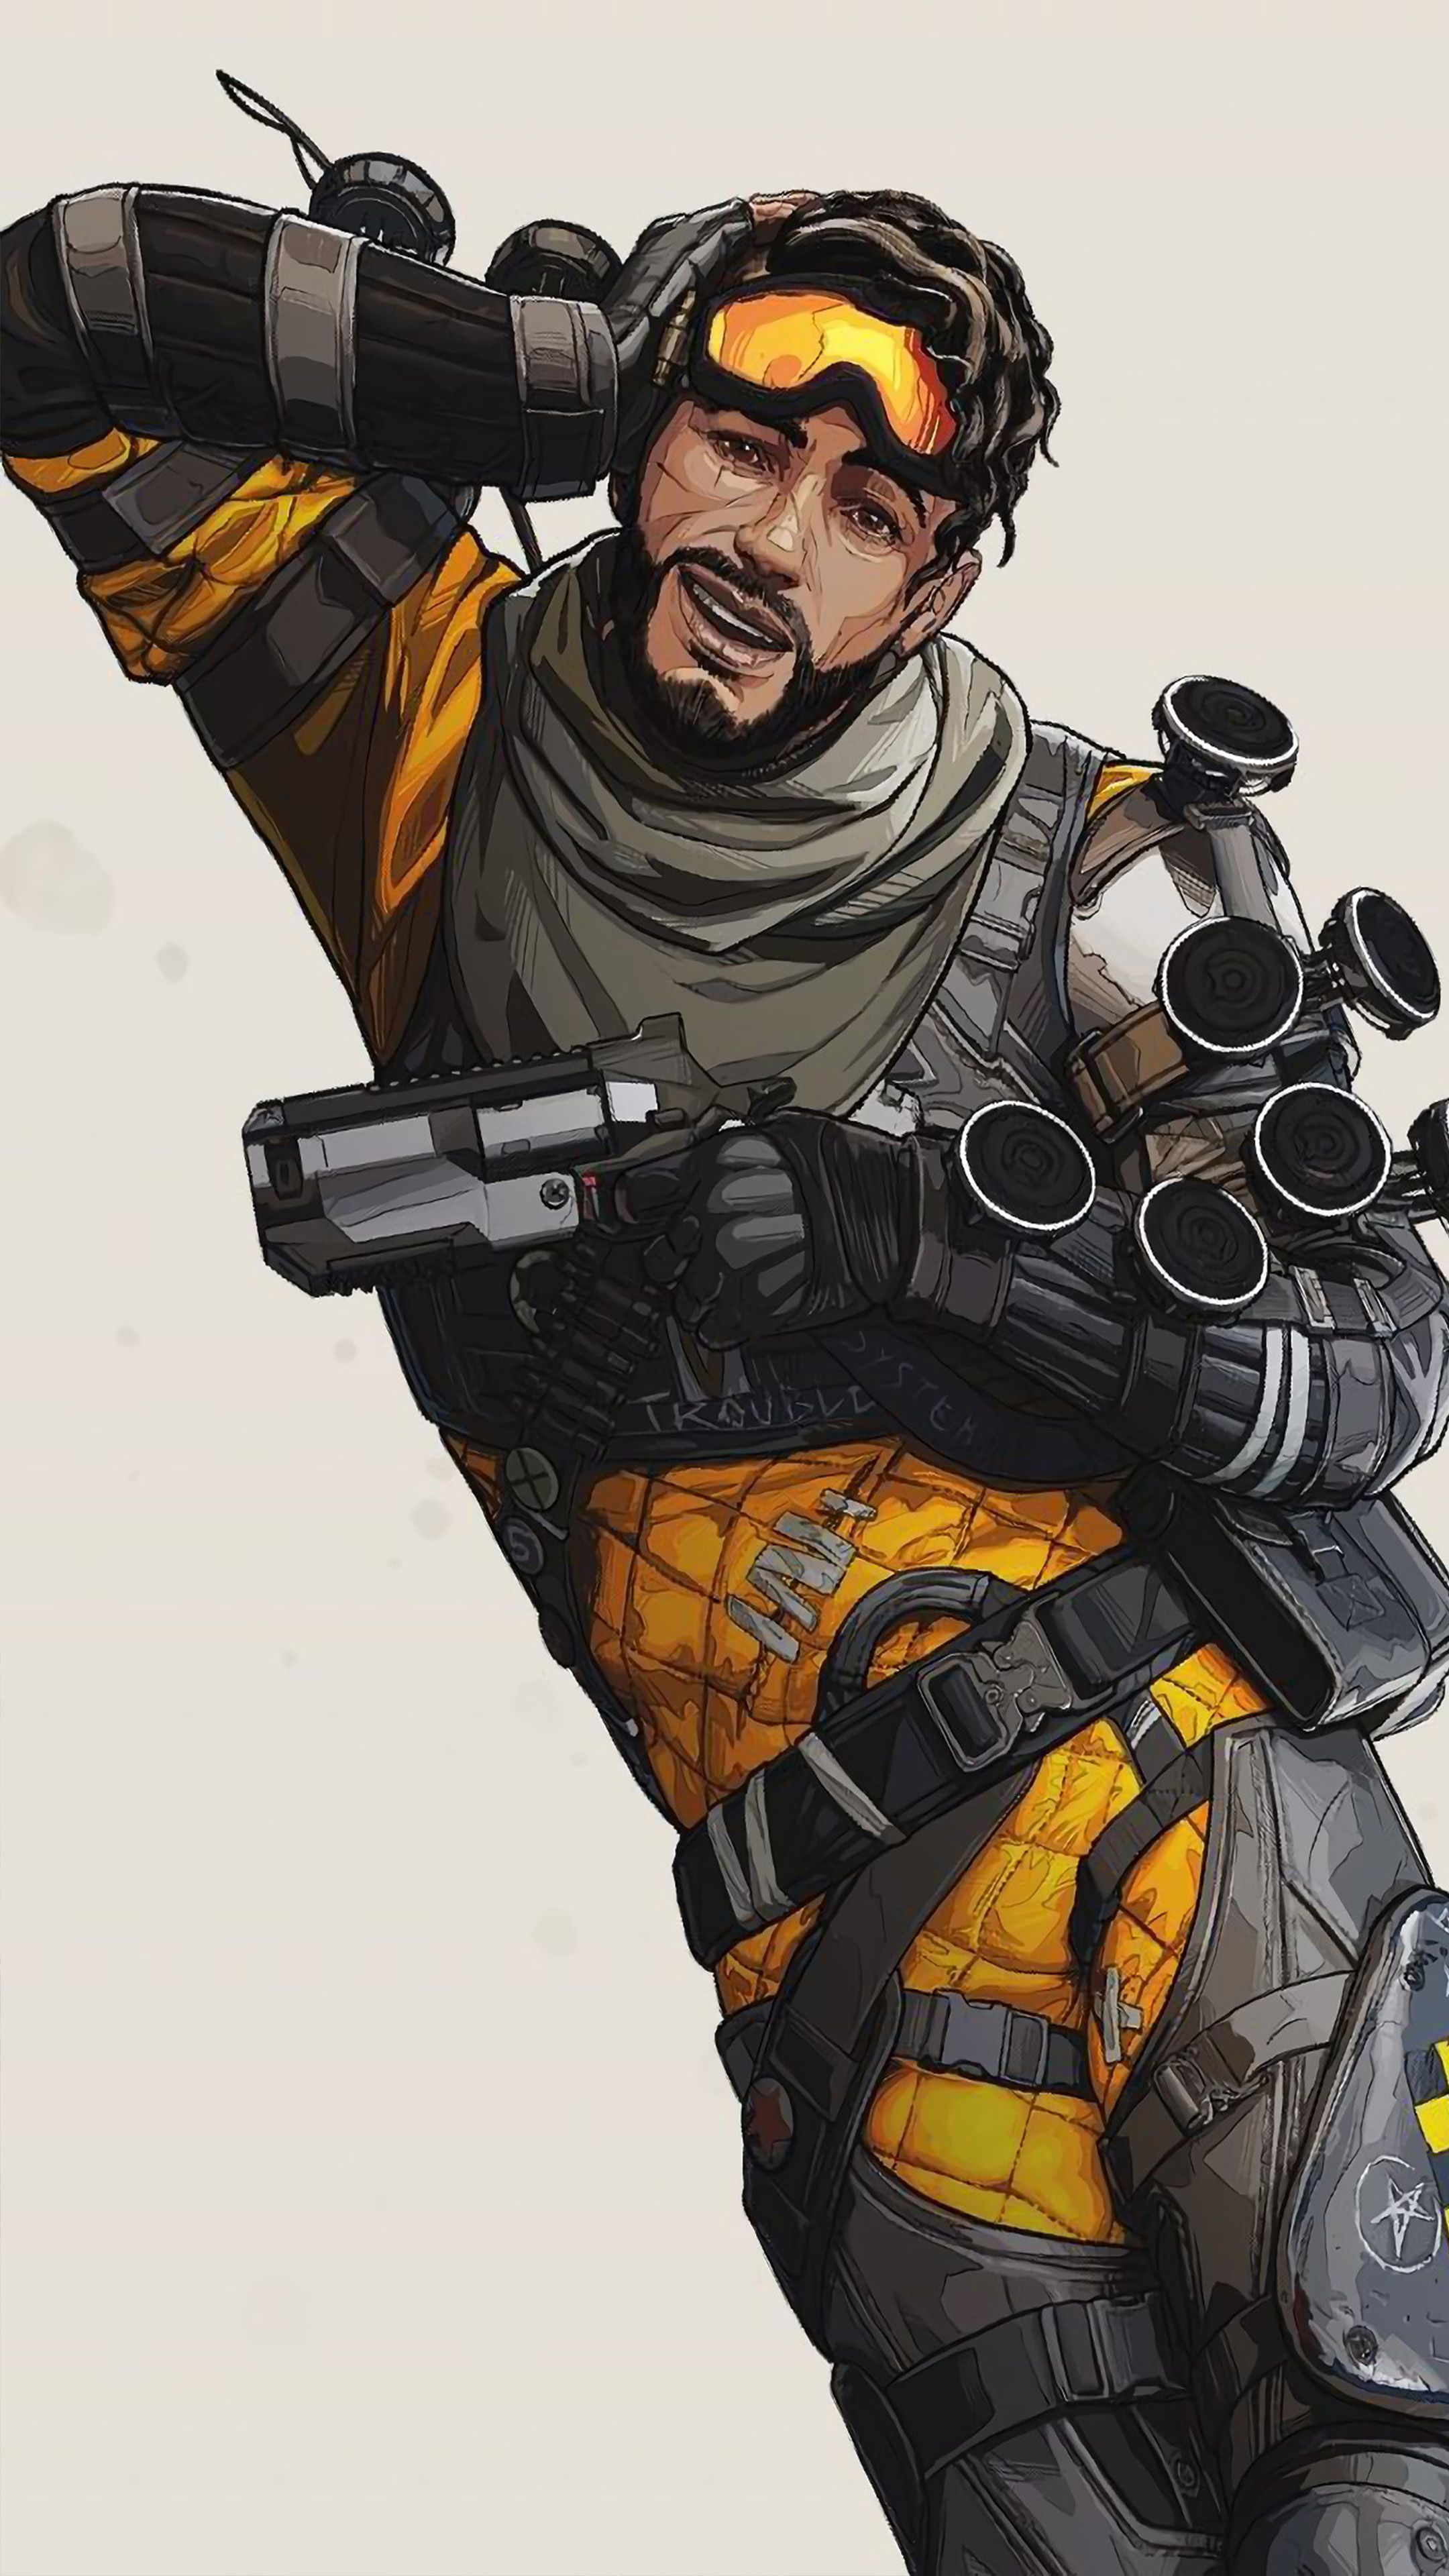 Mirage Apex Legends Free 4K Ultra HD Mobile Wallpapers.